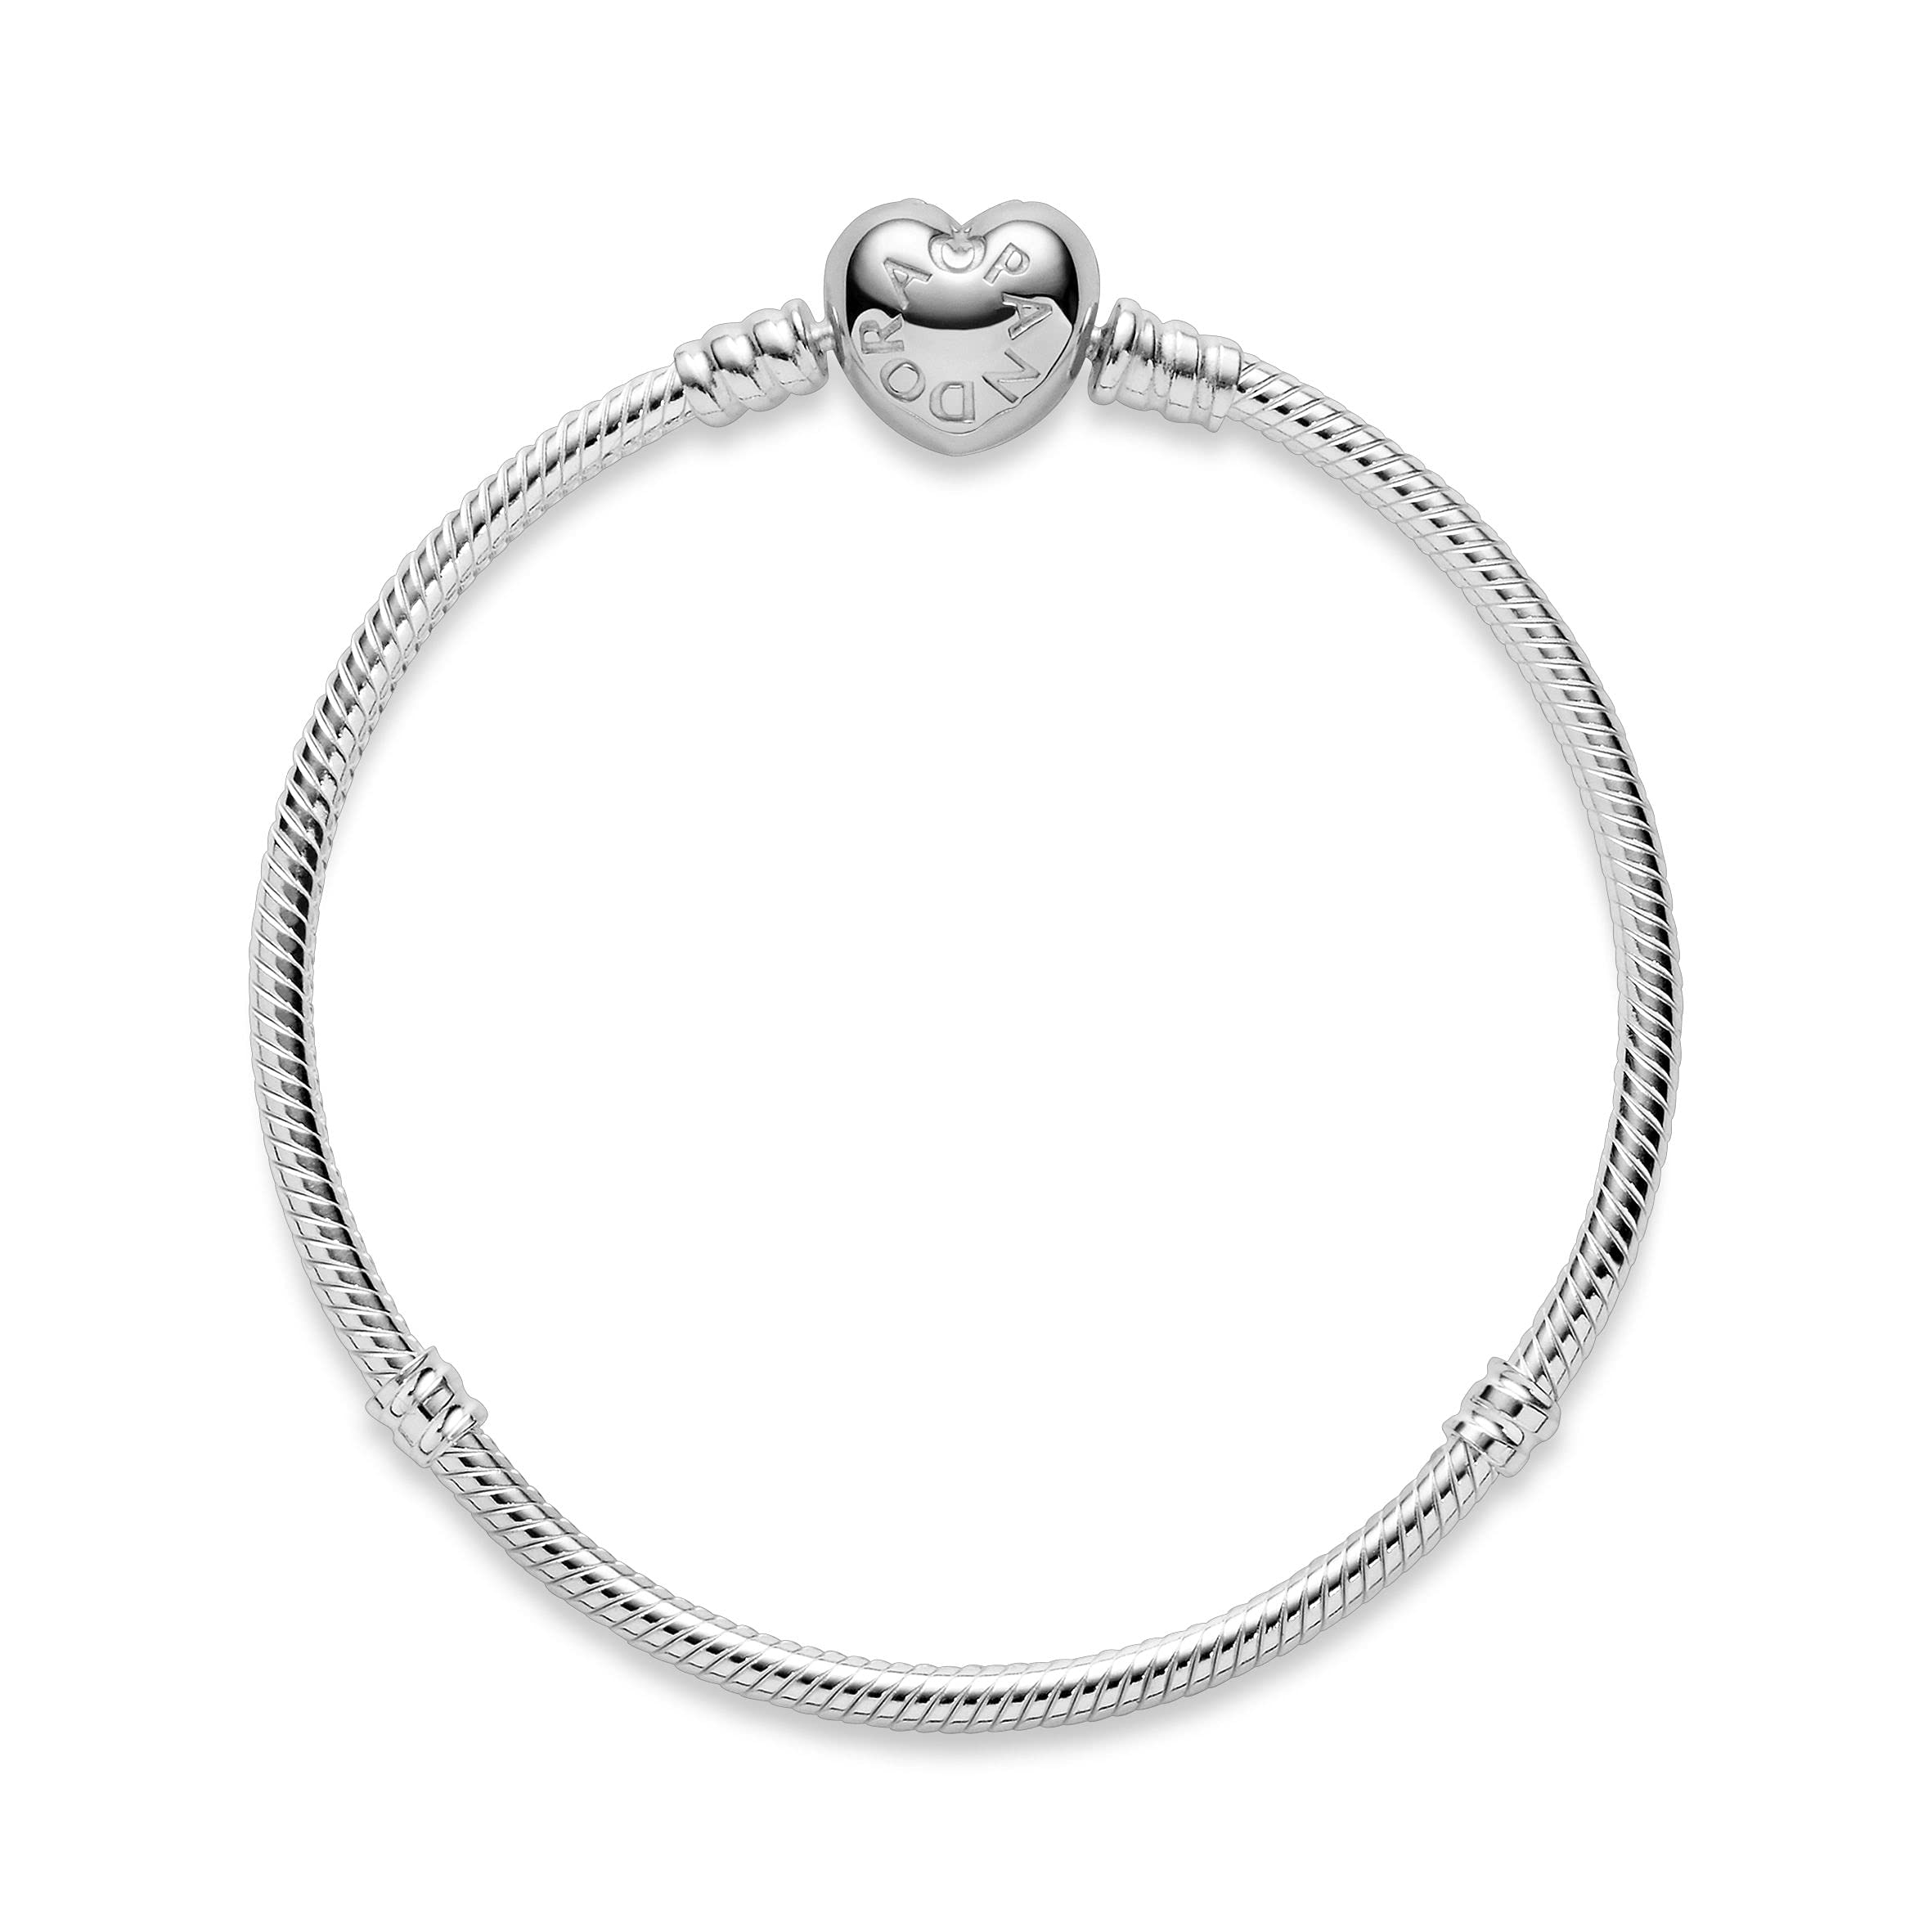 PANDORA Jewelry Moments Heart Clasp Snake Chain Charm Sterling Silver Bracelet, 6.3